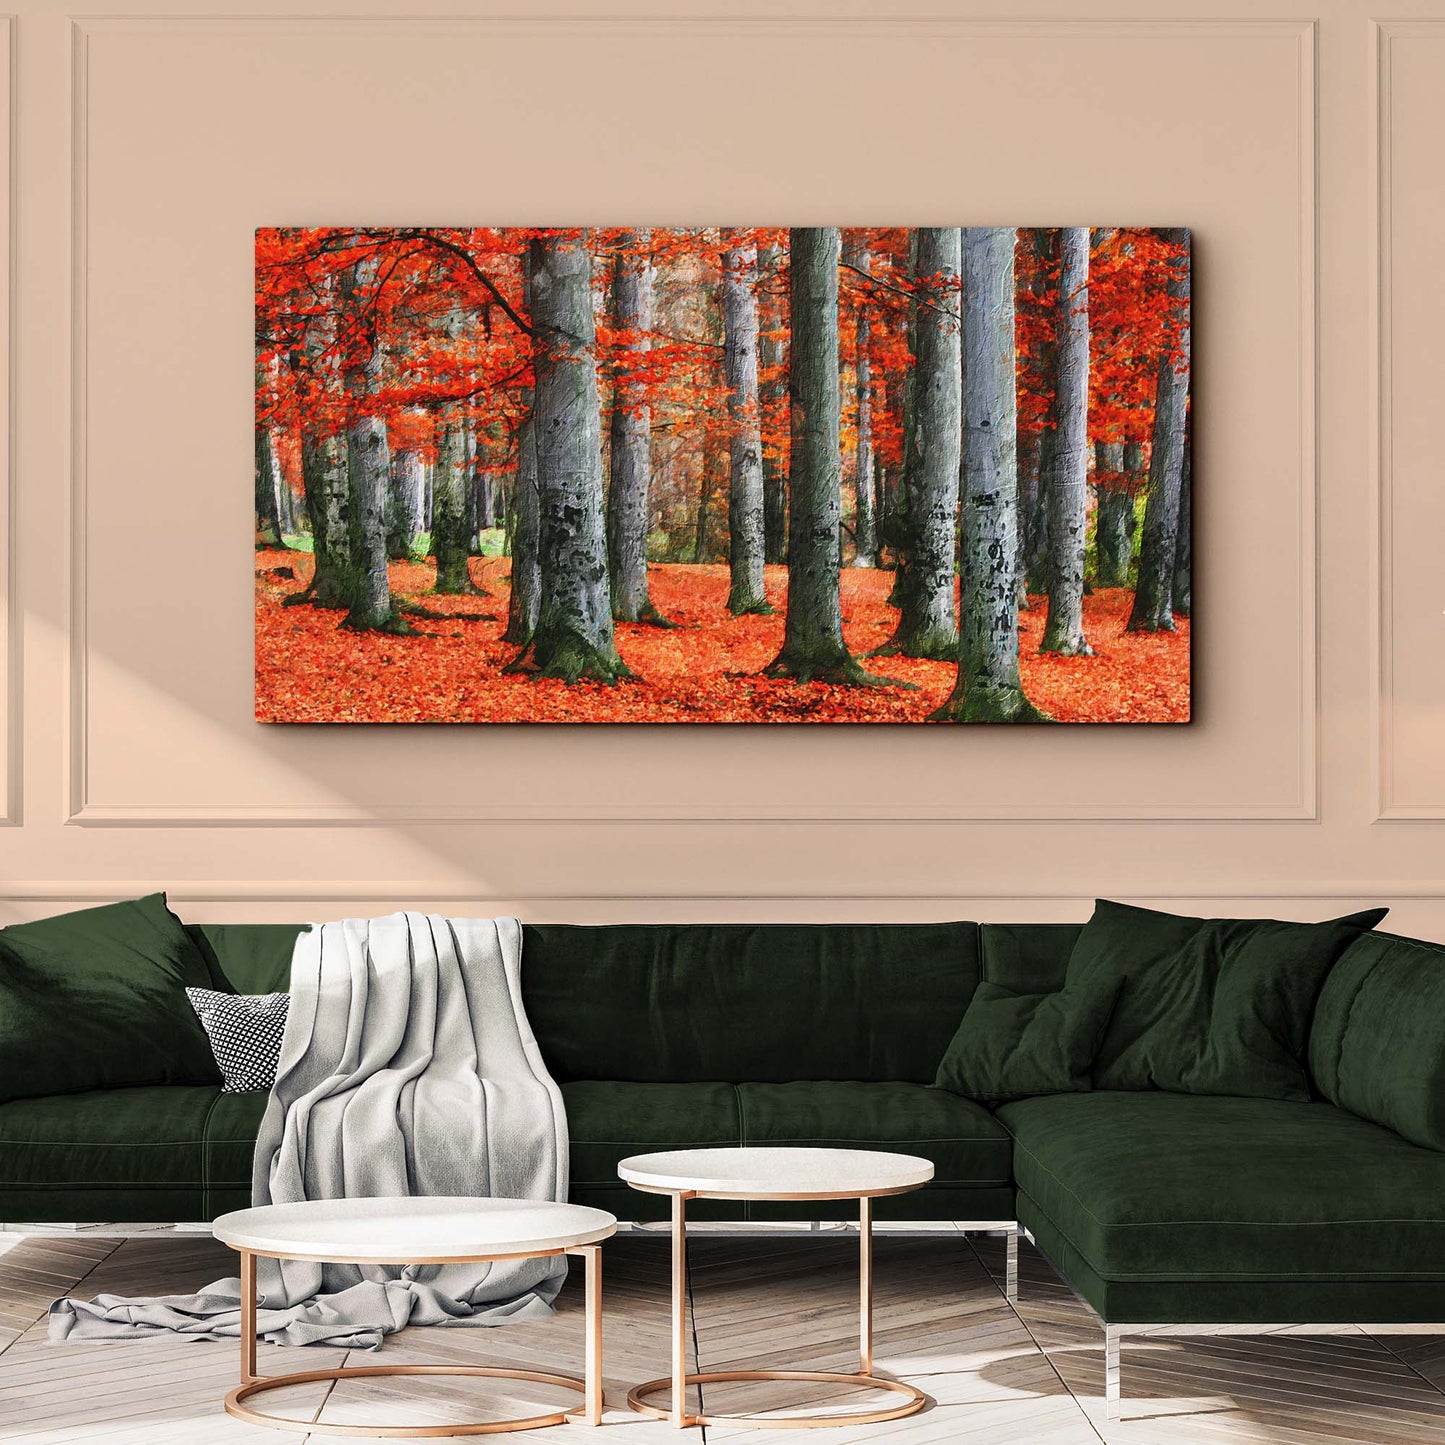 Red Beech Trees Canvas Wall Art Style 2 - Image by Tailored Canvases